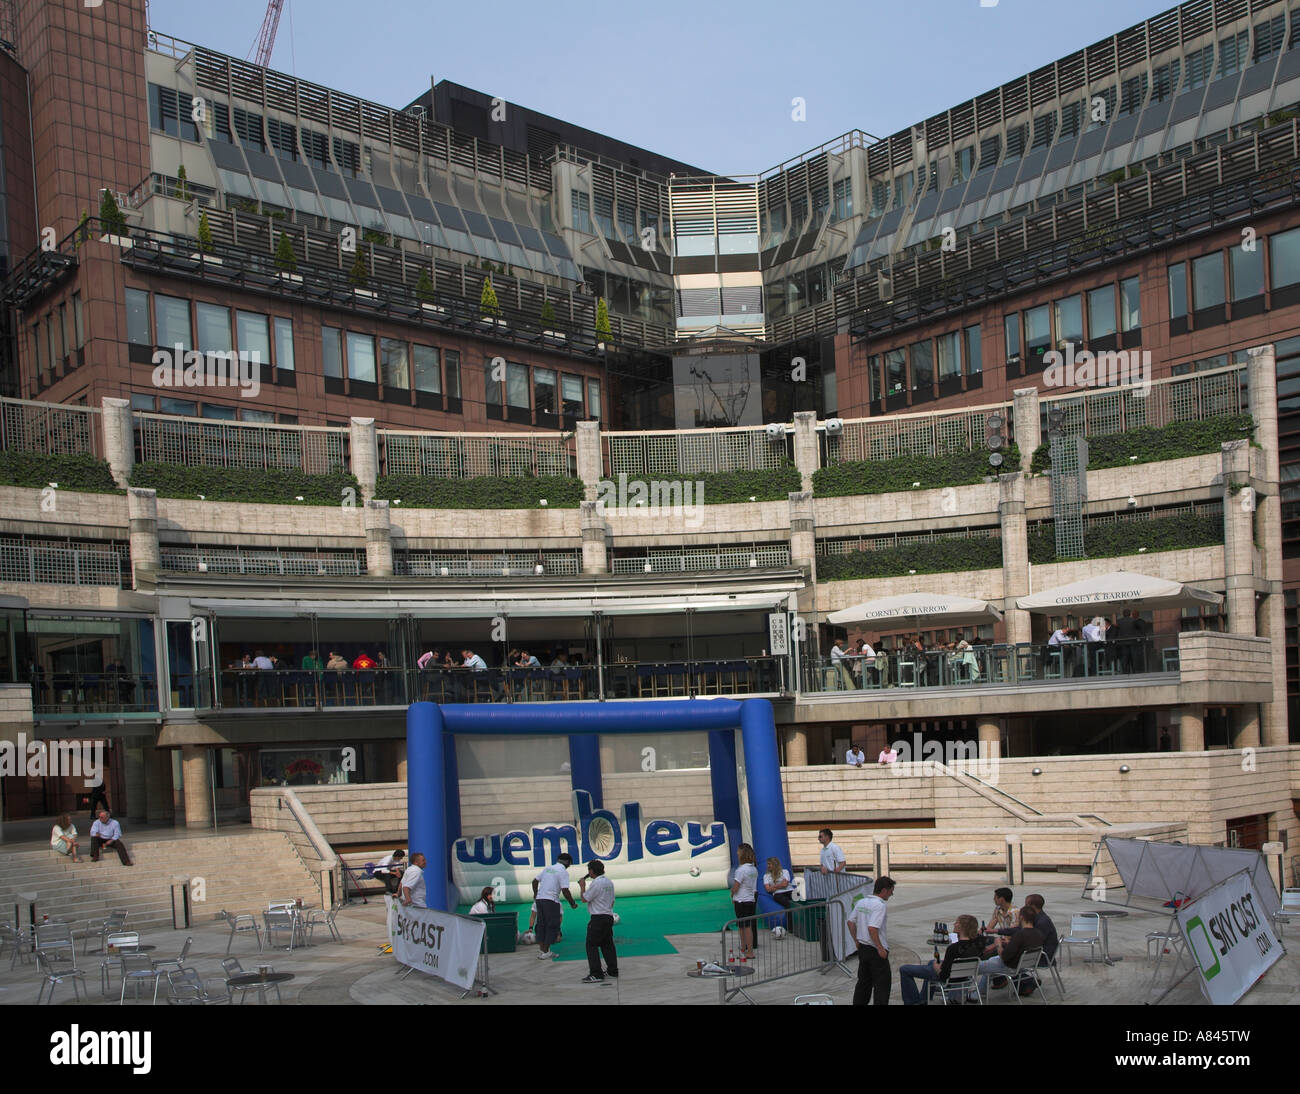 Lunchtime entertainment in the arena Broadgate Circus, City of London, England Stock Photo